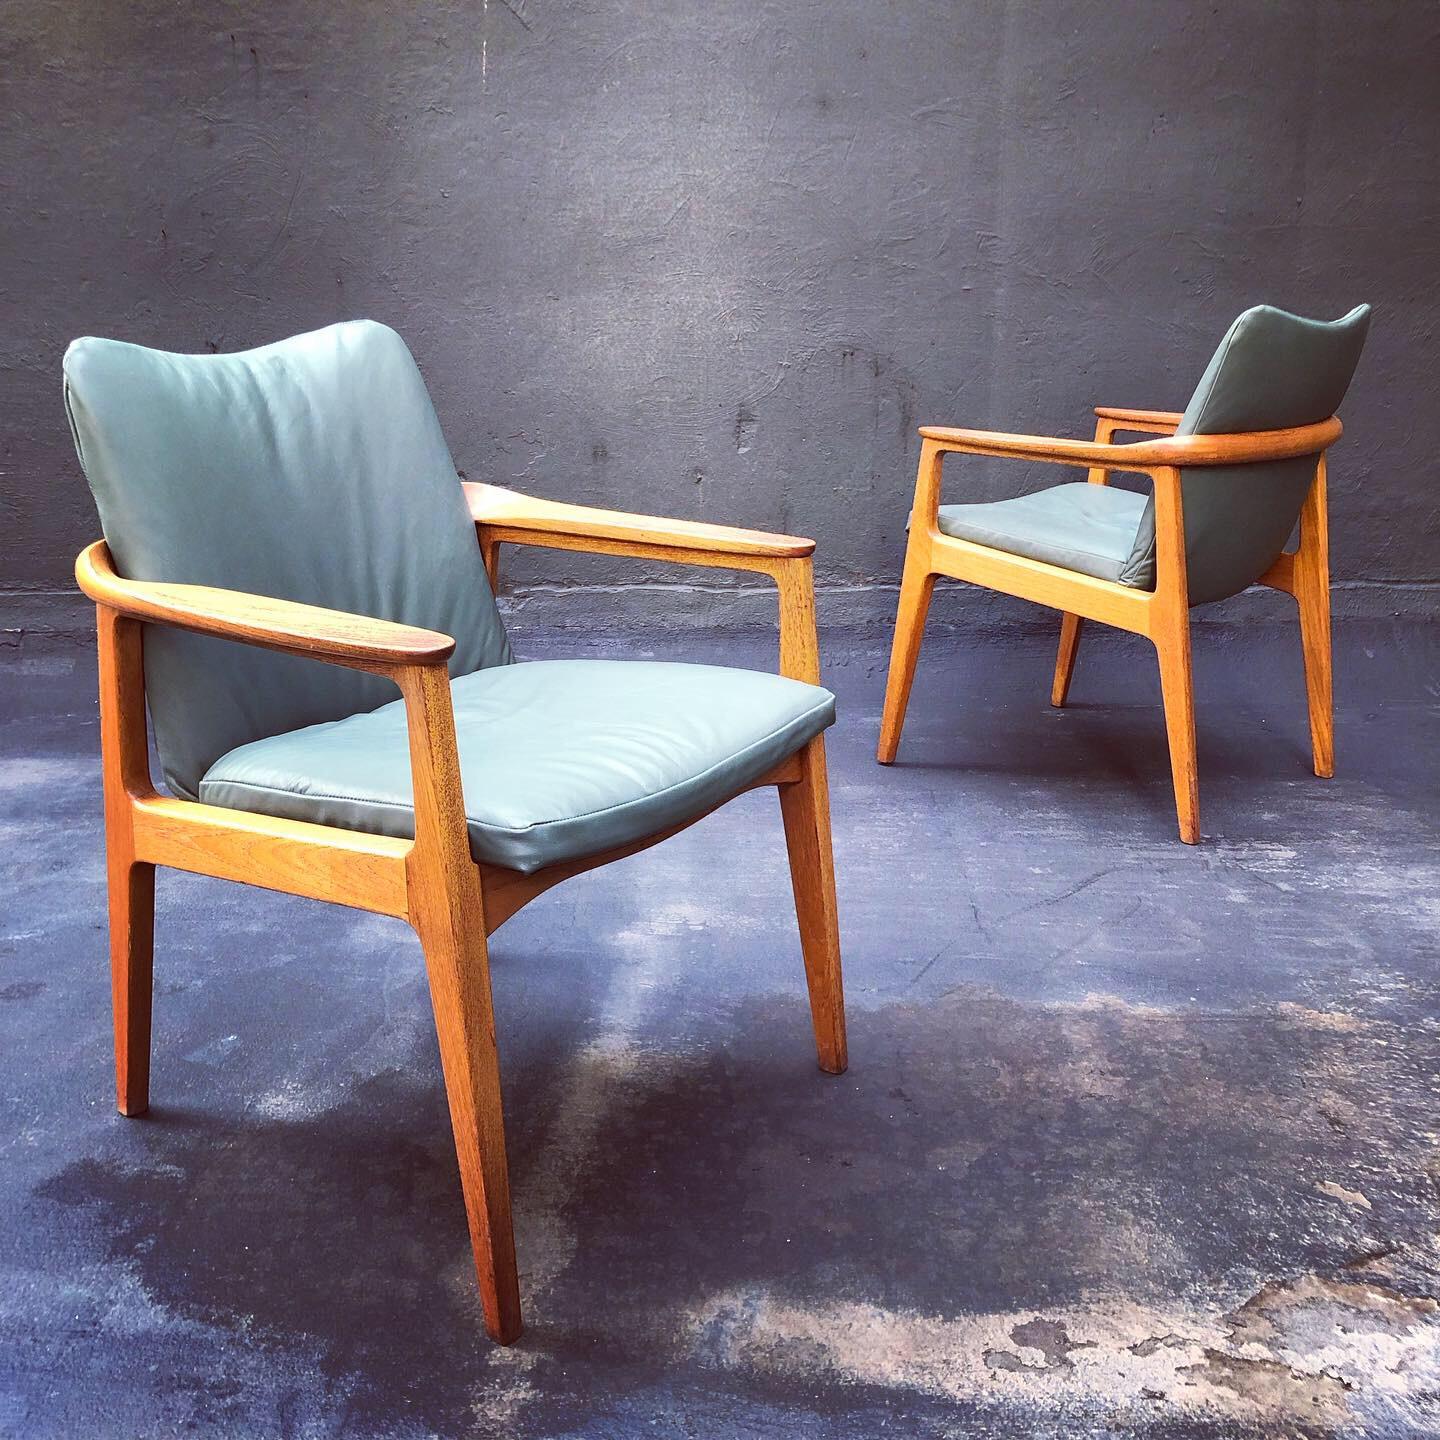 Gorgeous pair of Danish modern side chairs designed by Sigvard Bernadotte (a member of the Swedish Royal Family) and made by renowned furniture maker France & Son. These chairs feature beautifully sculpted/twisted teak frames and new moss-green